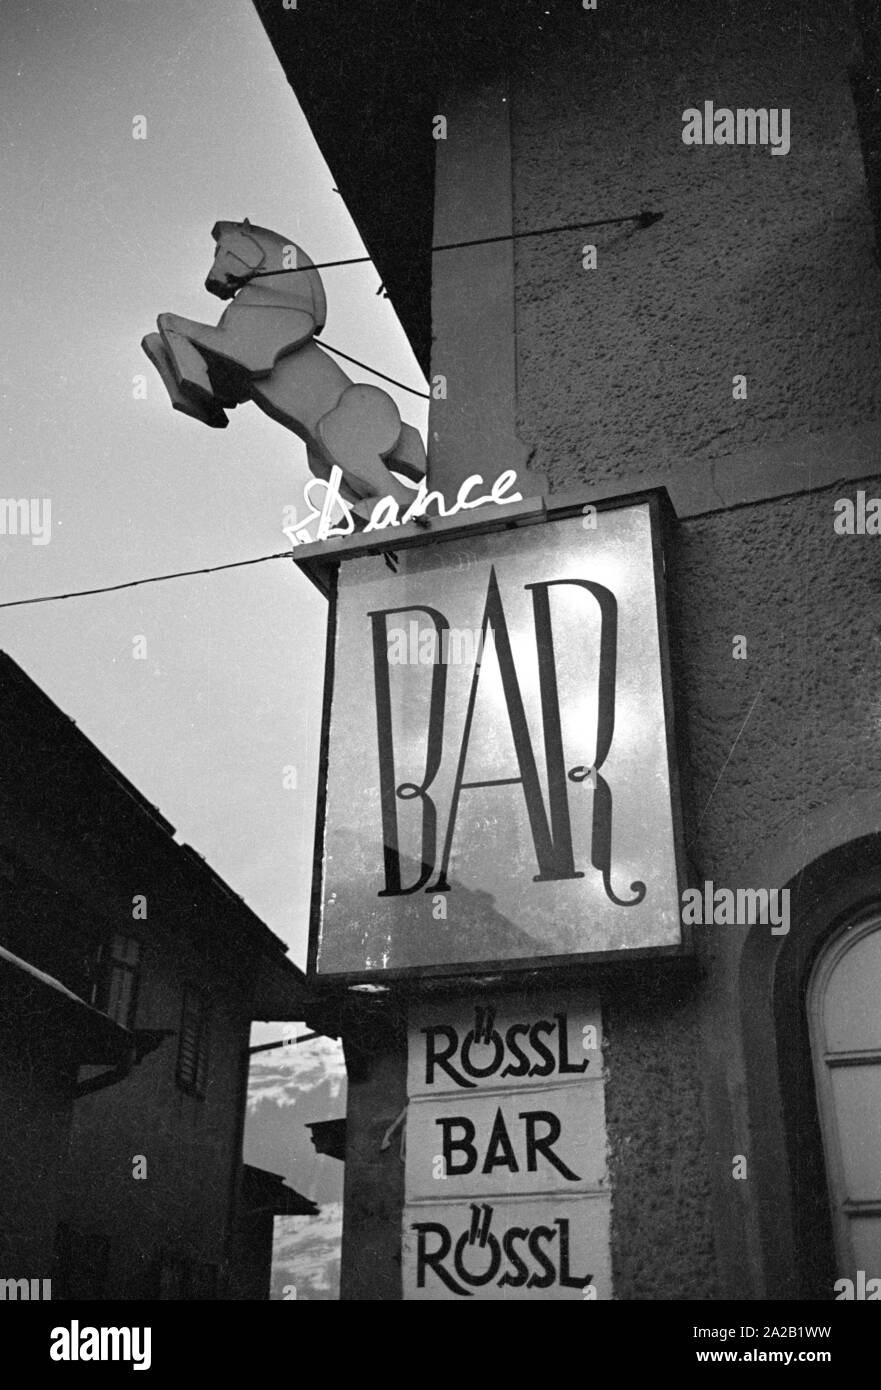 View of the entrance area of the dance bar 'Roessl' in the center of Kitzbuehel. The image was taken at the time when the Hahnenkamm race took place at Kitzbuehel. Stock Photo